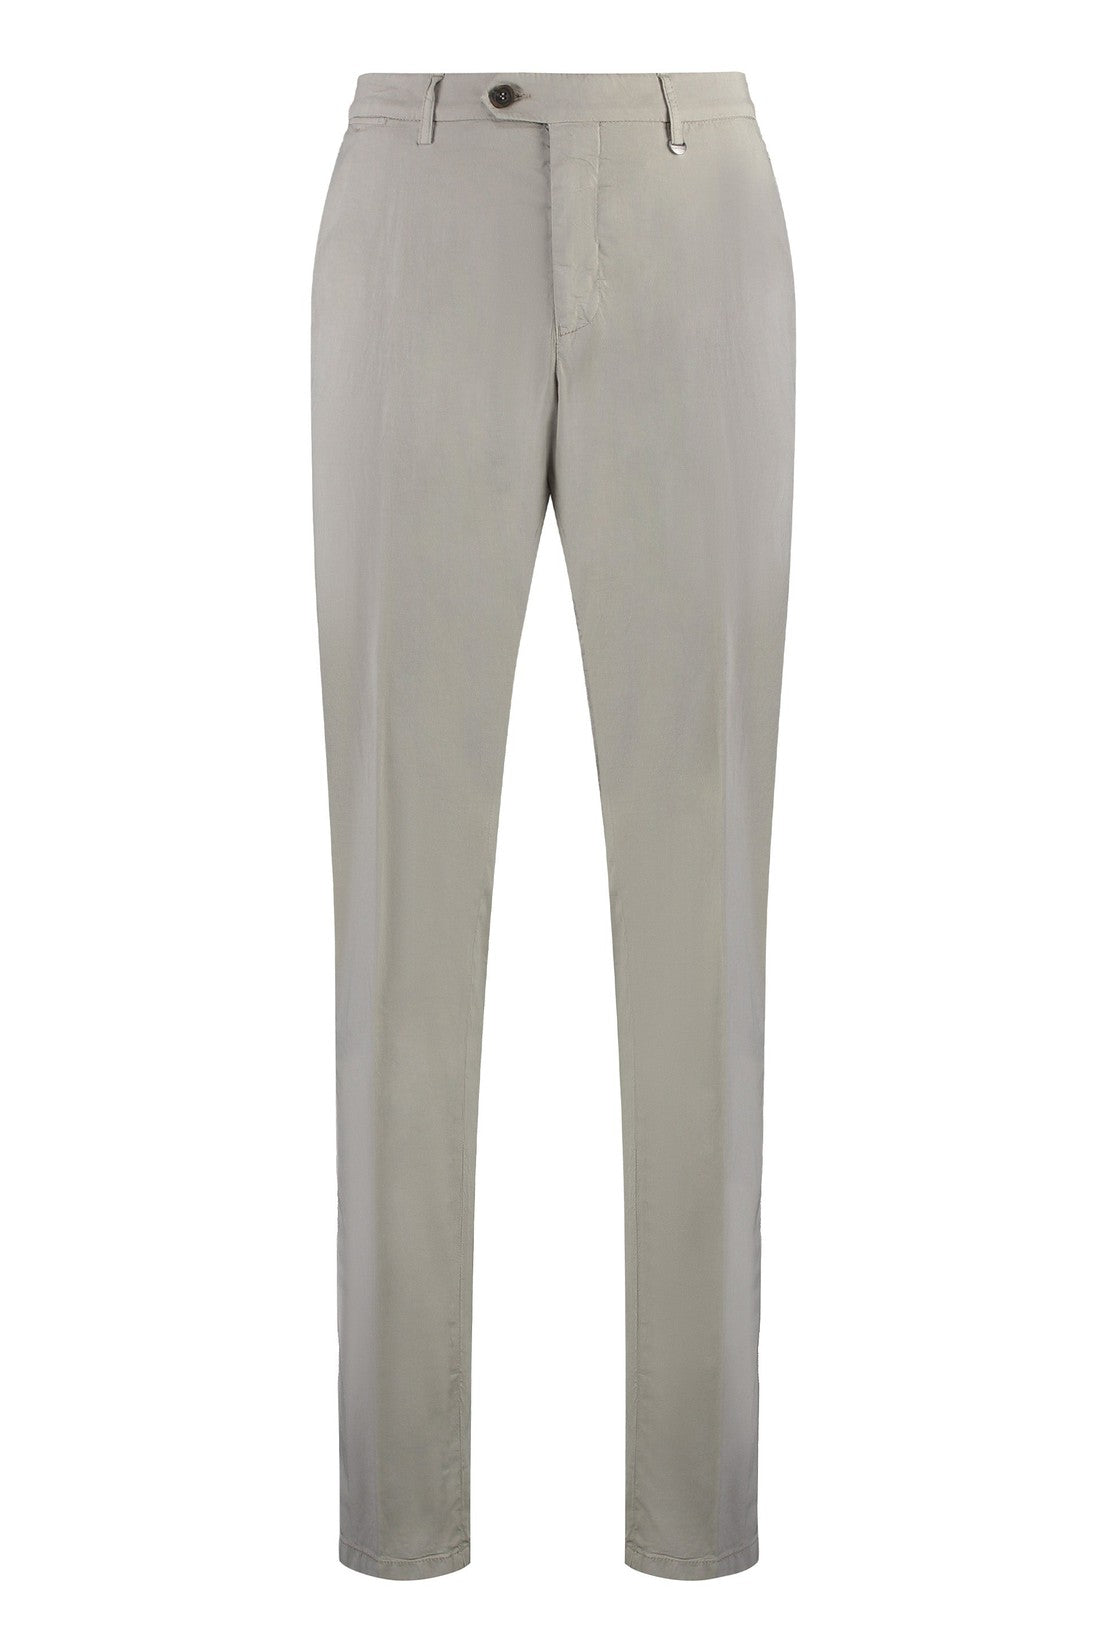 Canali-OUTLET-SALE-Slim fit chino trousers-ARCHIVIST